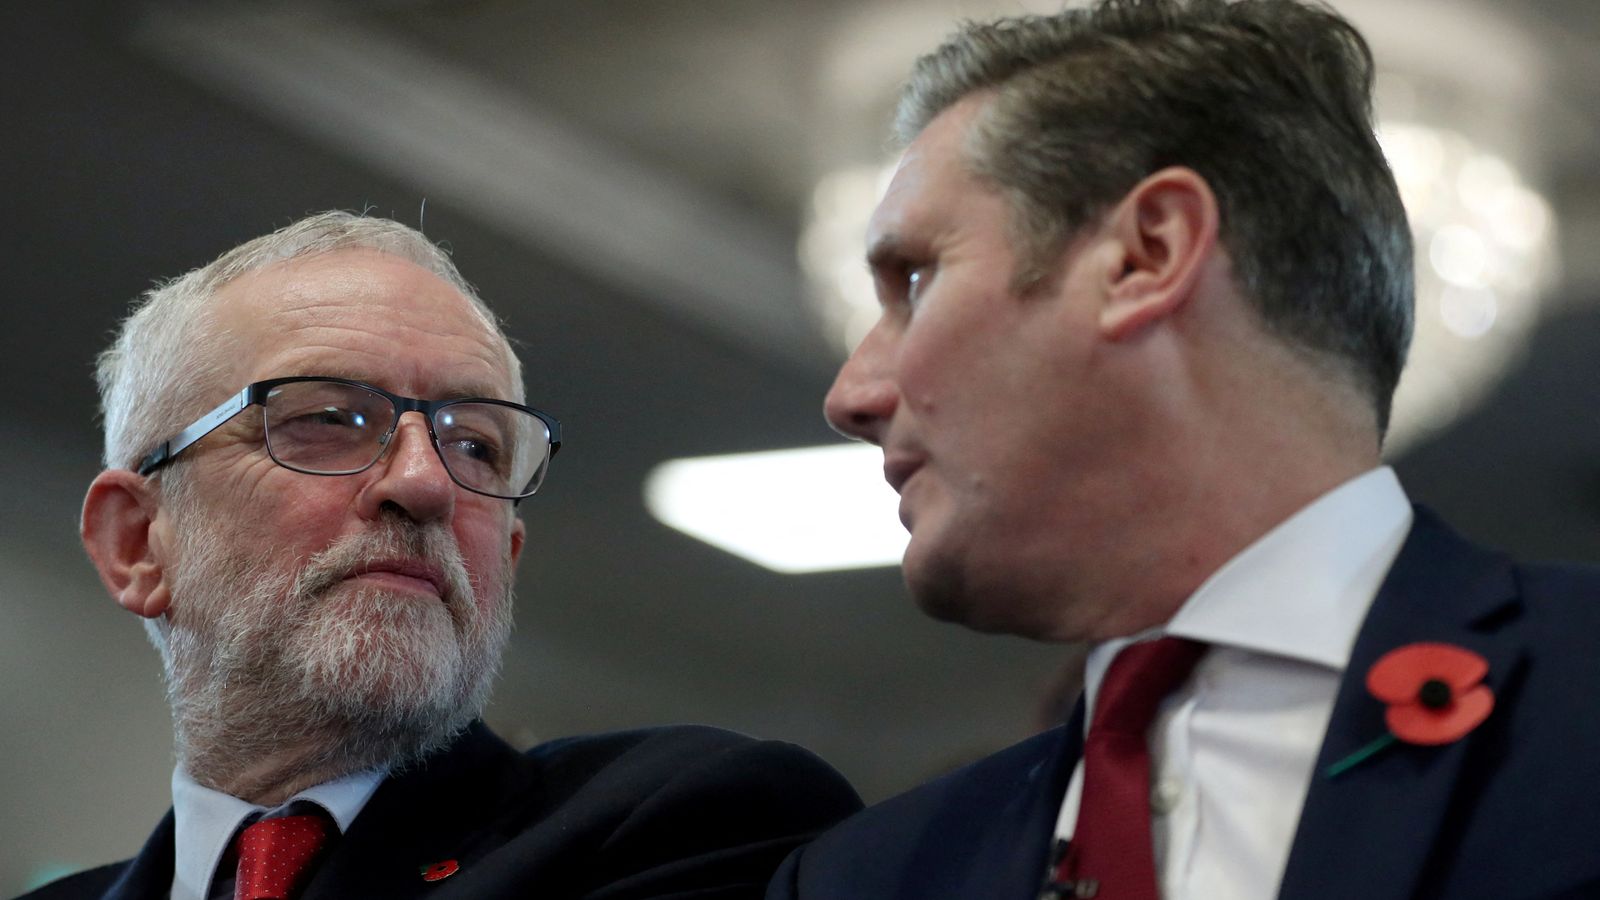 Labour accused of trying to delay lawsuit against former employees over fears of election clash